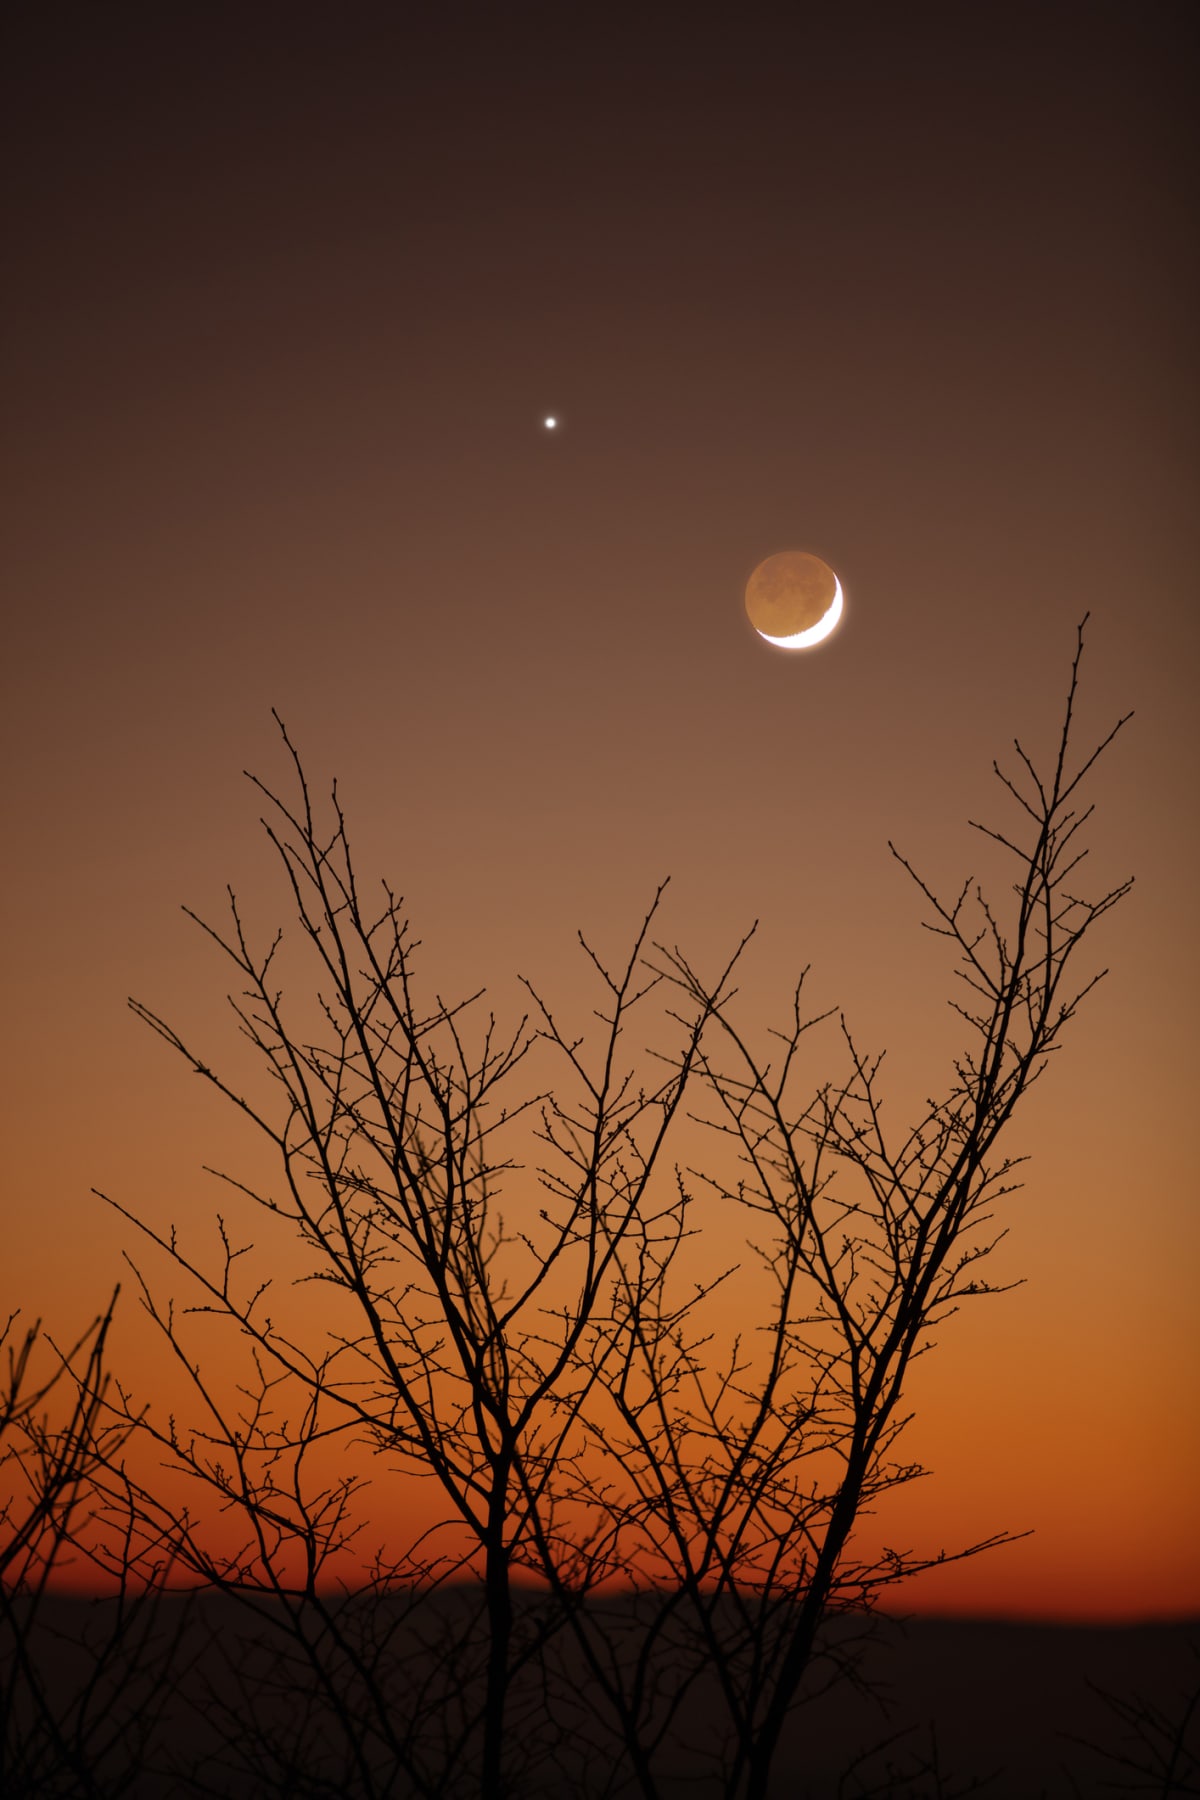 The moon and Saturn visible in a night sky with an orange hue